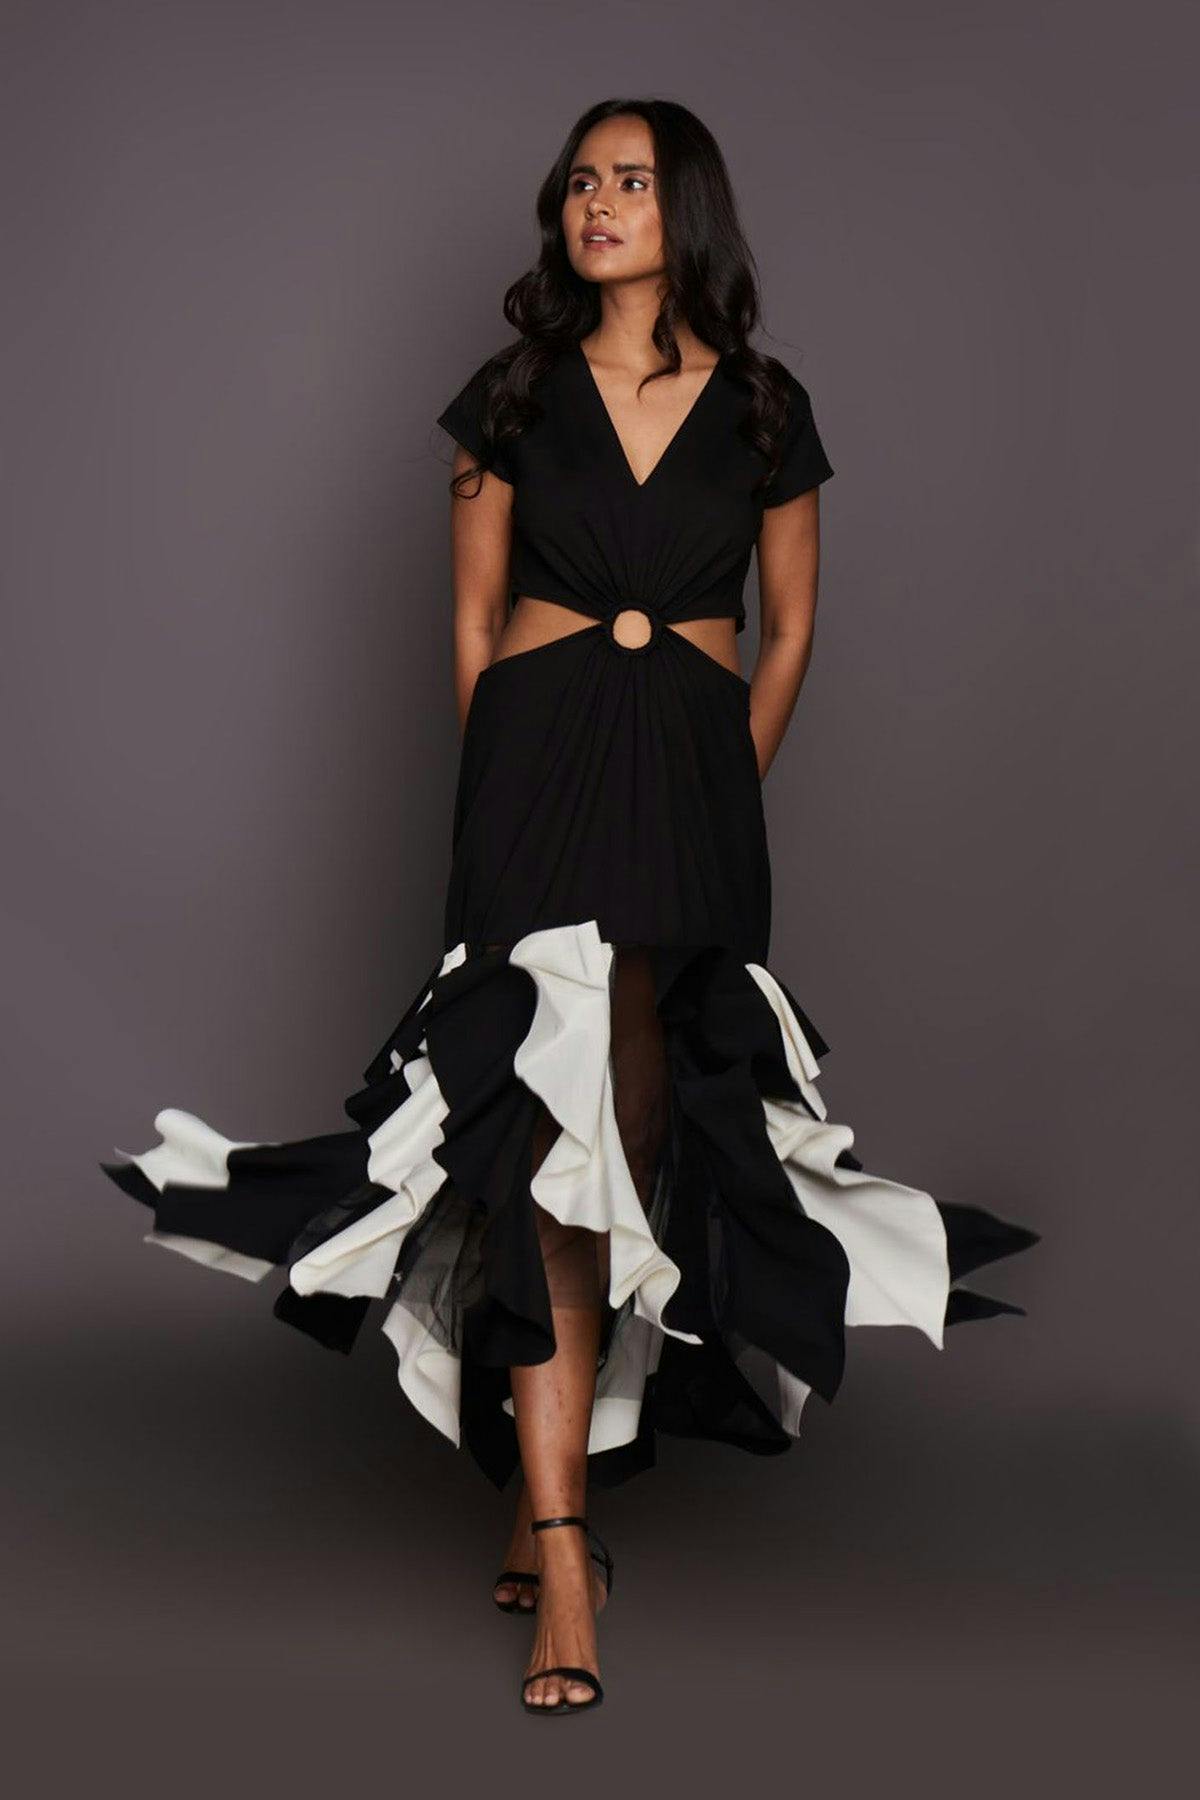 Black & White Side Cutout Dress With Ruffles, a product by Deepika Arora